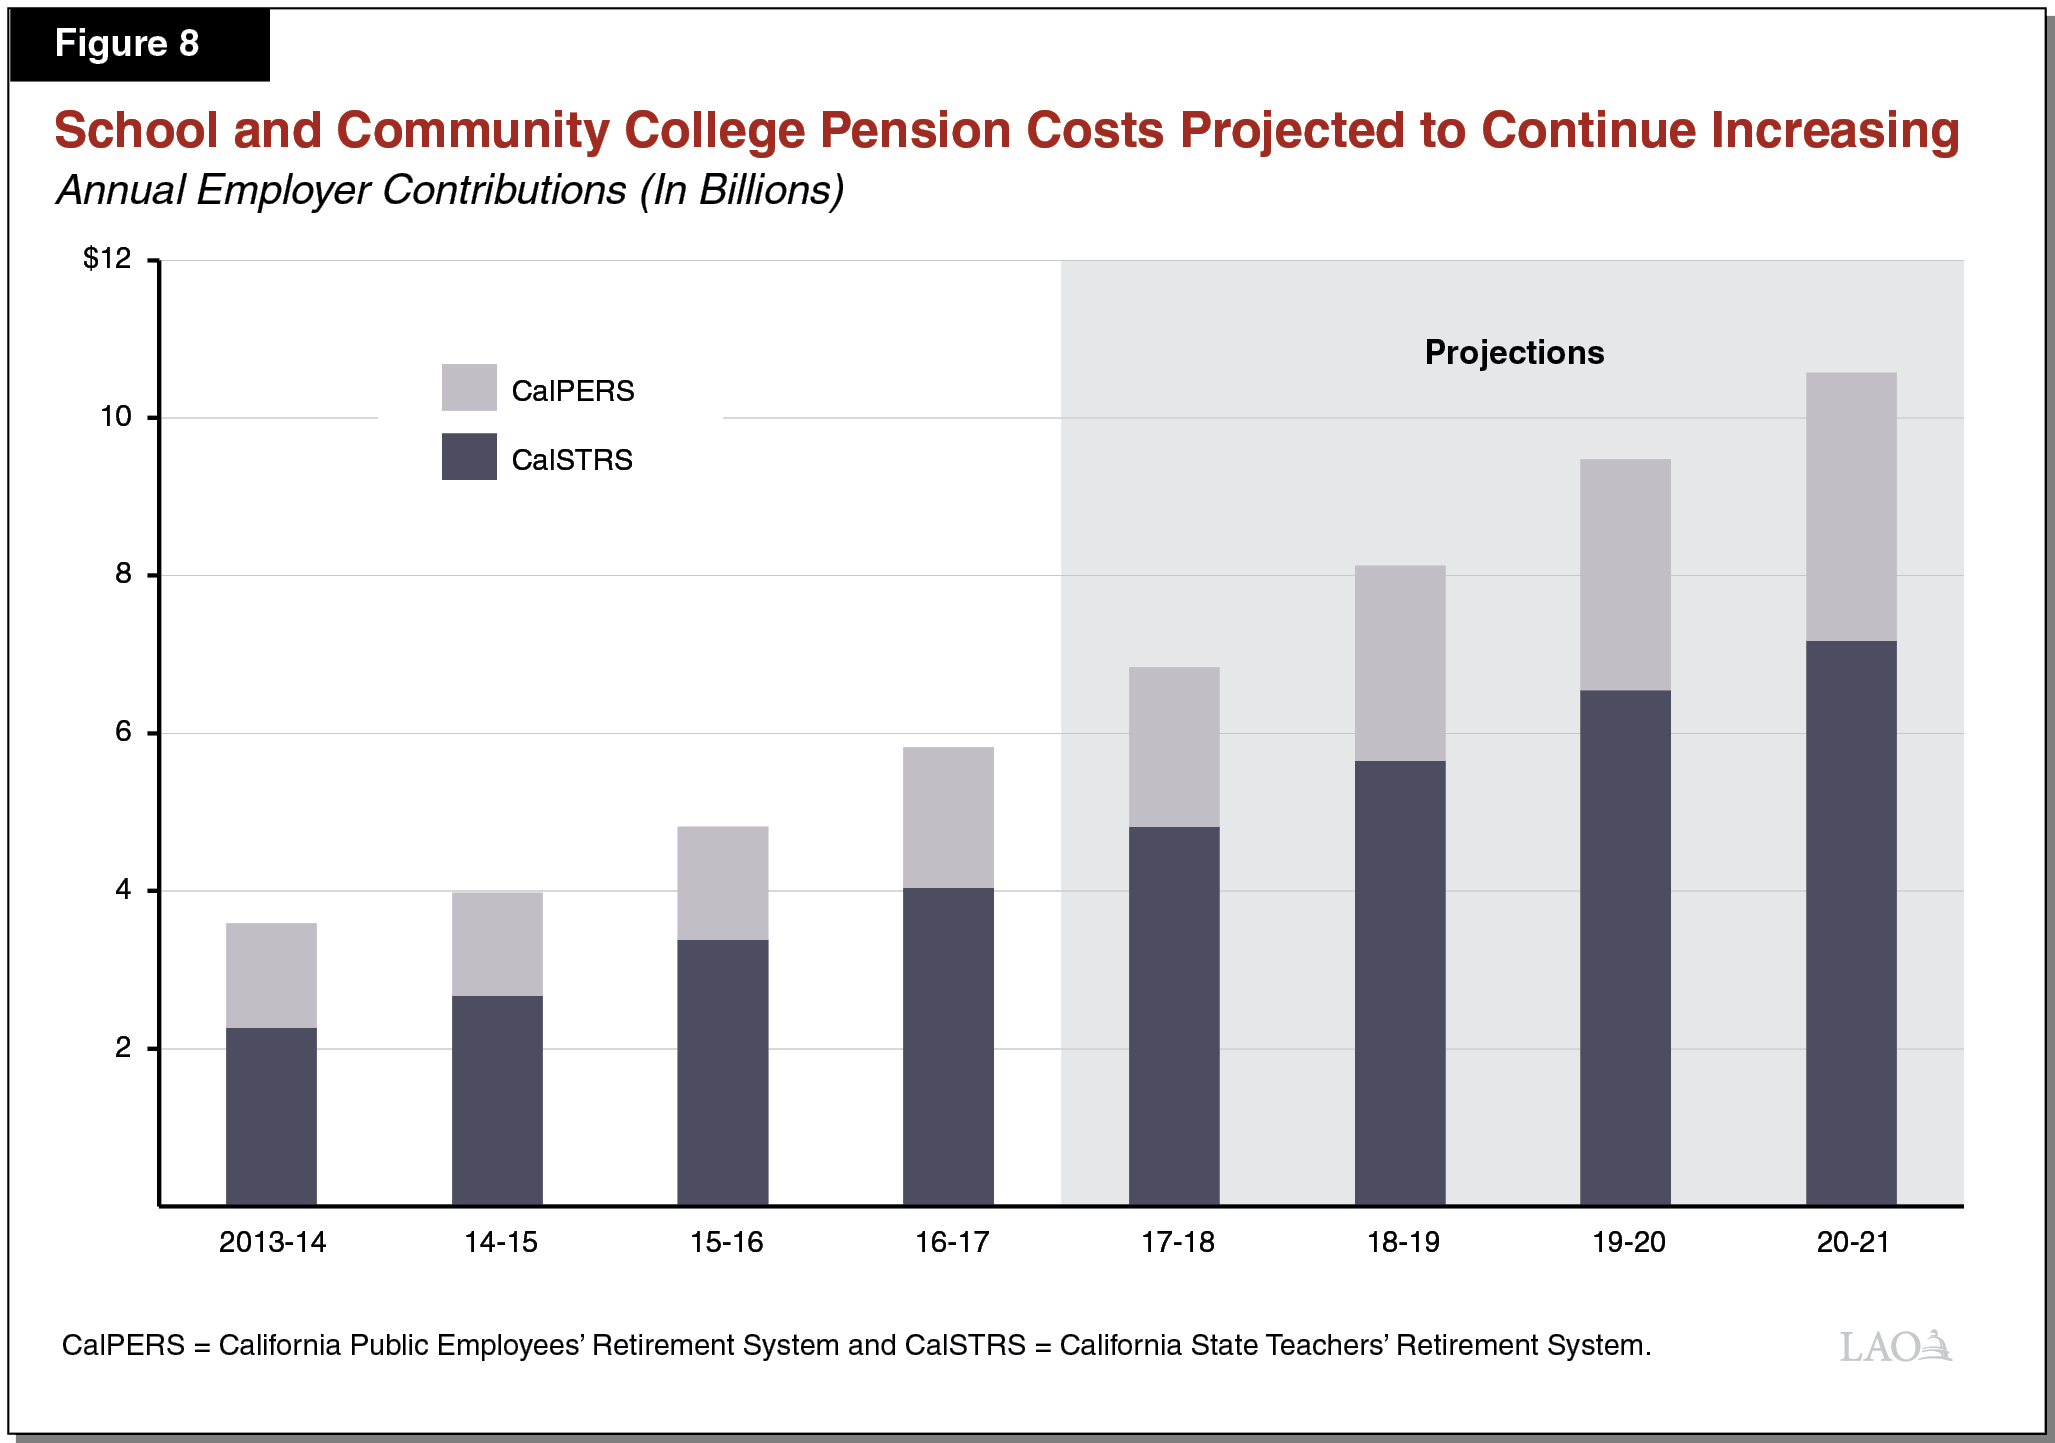 Figure 8 - School and Community College Pension Costs Rising Over the Period